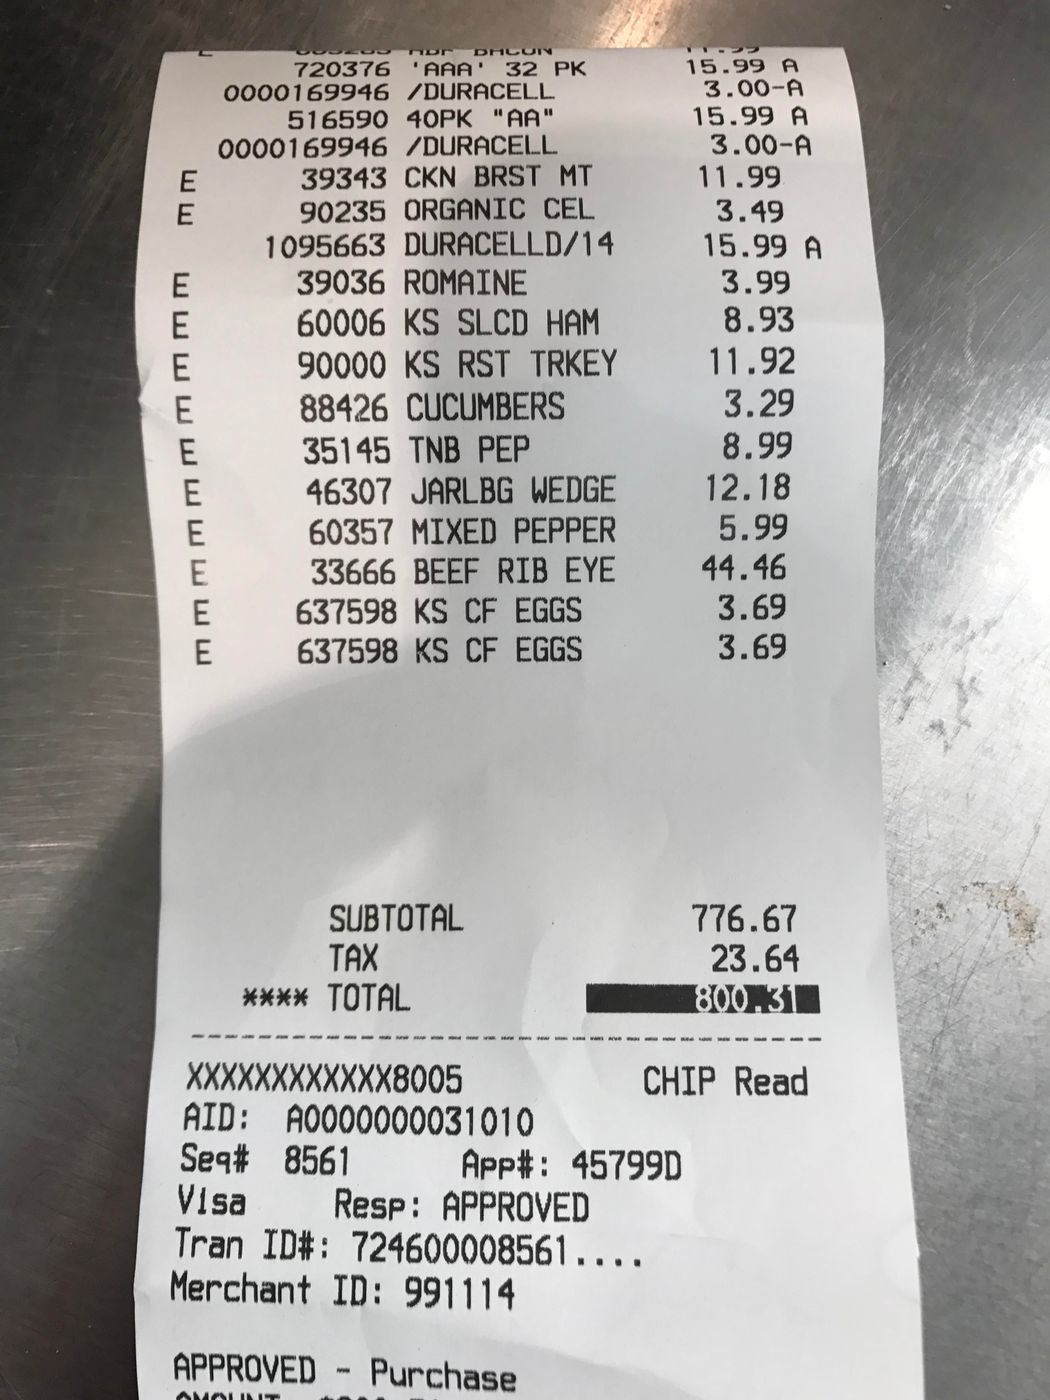 There's Actually A Reason Costco Checks Your Receipt, And It's Not To ...